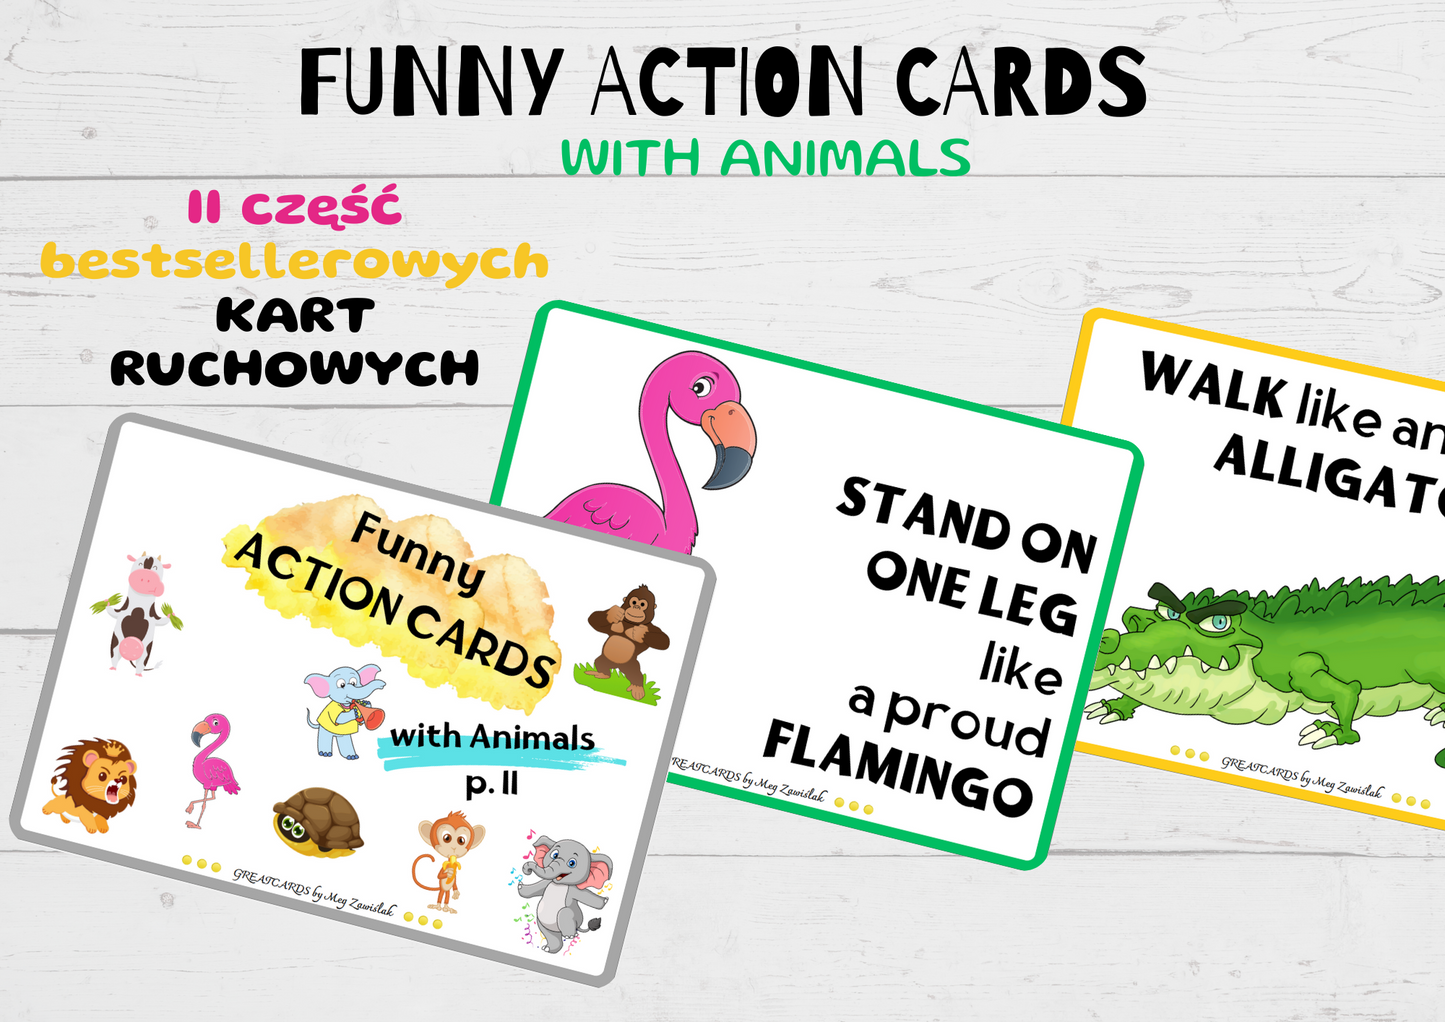 Greatcards Funny Action Cards with Animals p. II